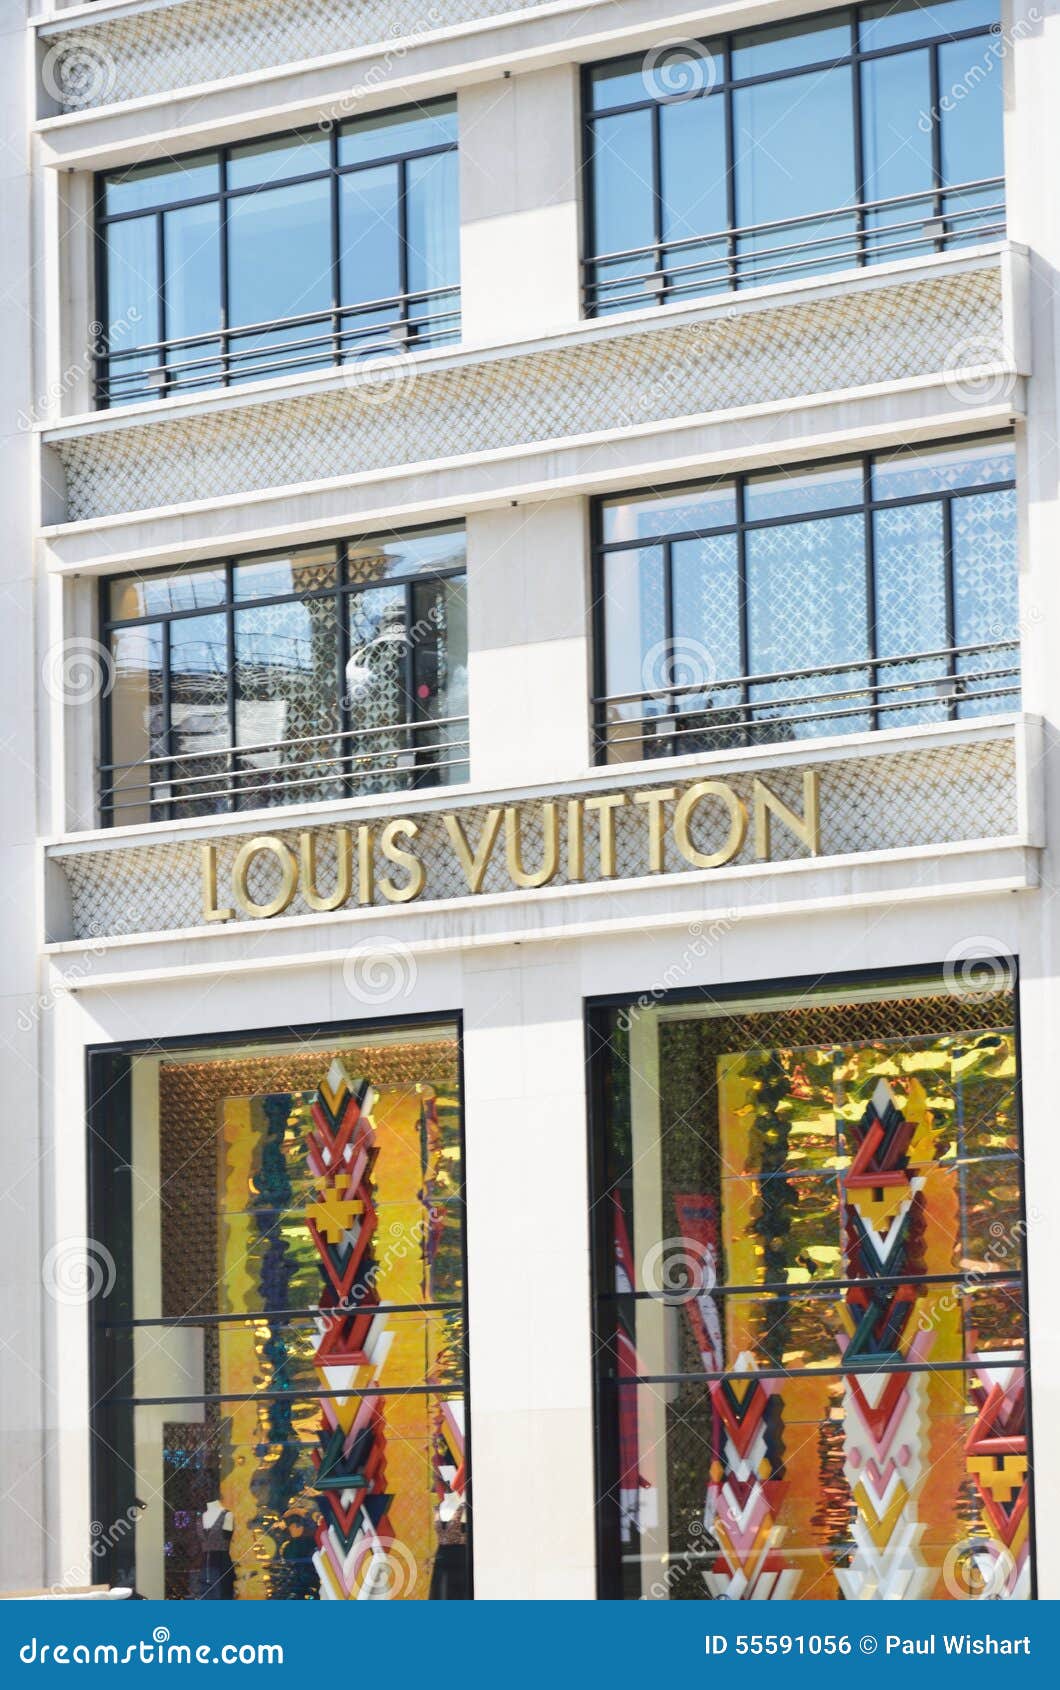 Louis Vuitton store front, Champs Elysee